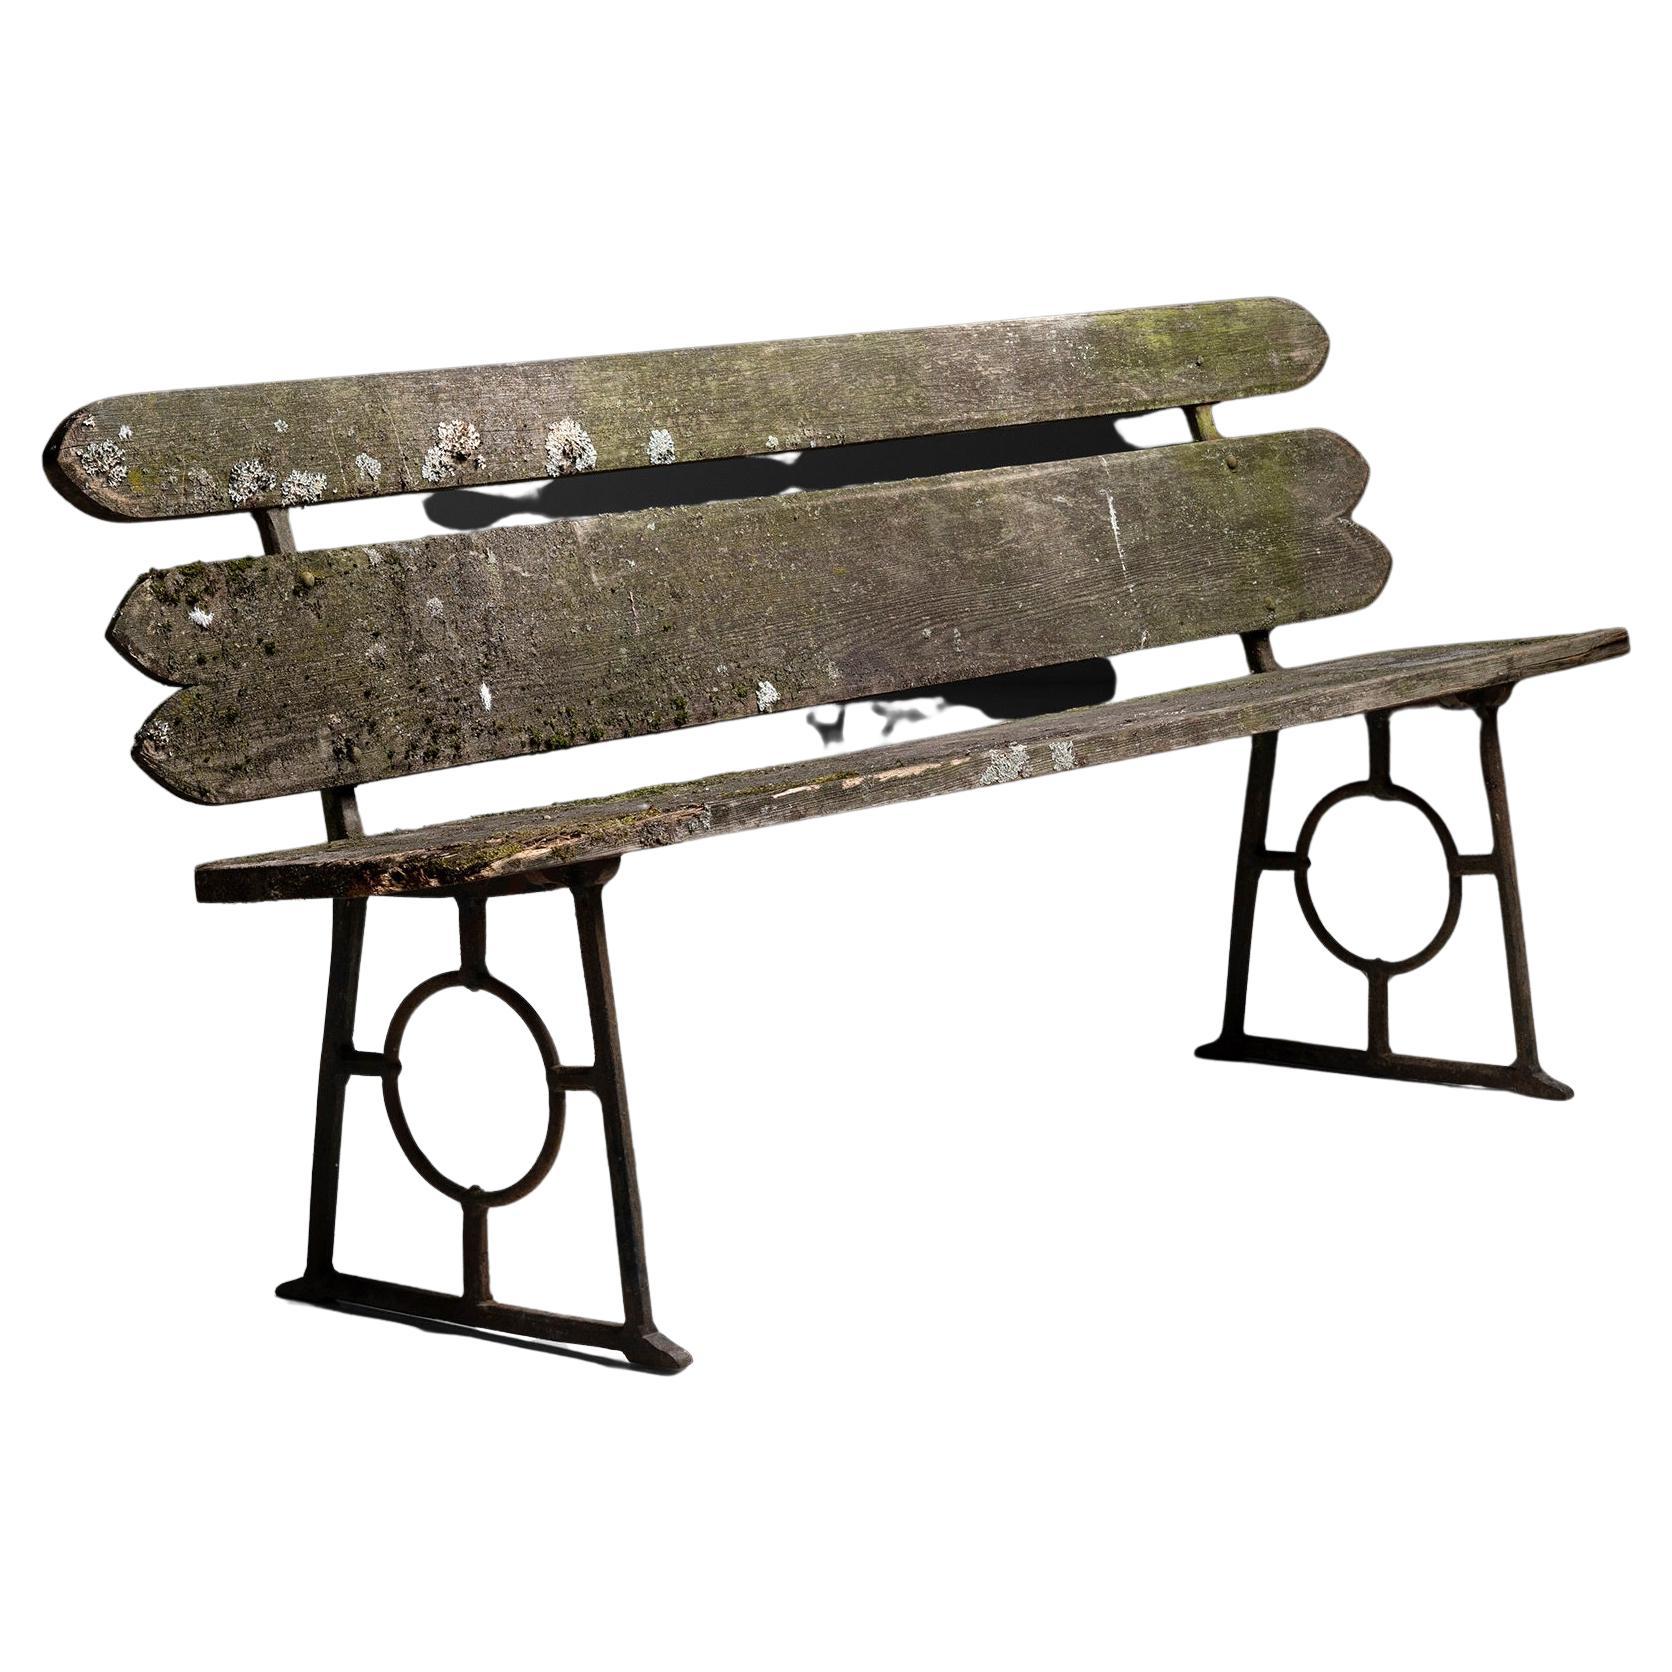 Arts & Crafts Garden bench

England circa 1920

Patinated pine plank seat and back on two cast iron trestle ends. Made by Edwards Bays Ltd of Swindon.

Measures: 72.25”L x 17.25”d x 30.75”h x 17.75” seat.